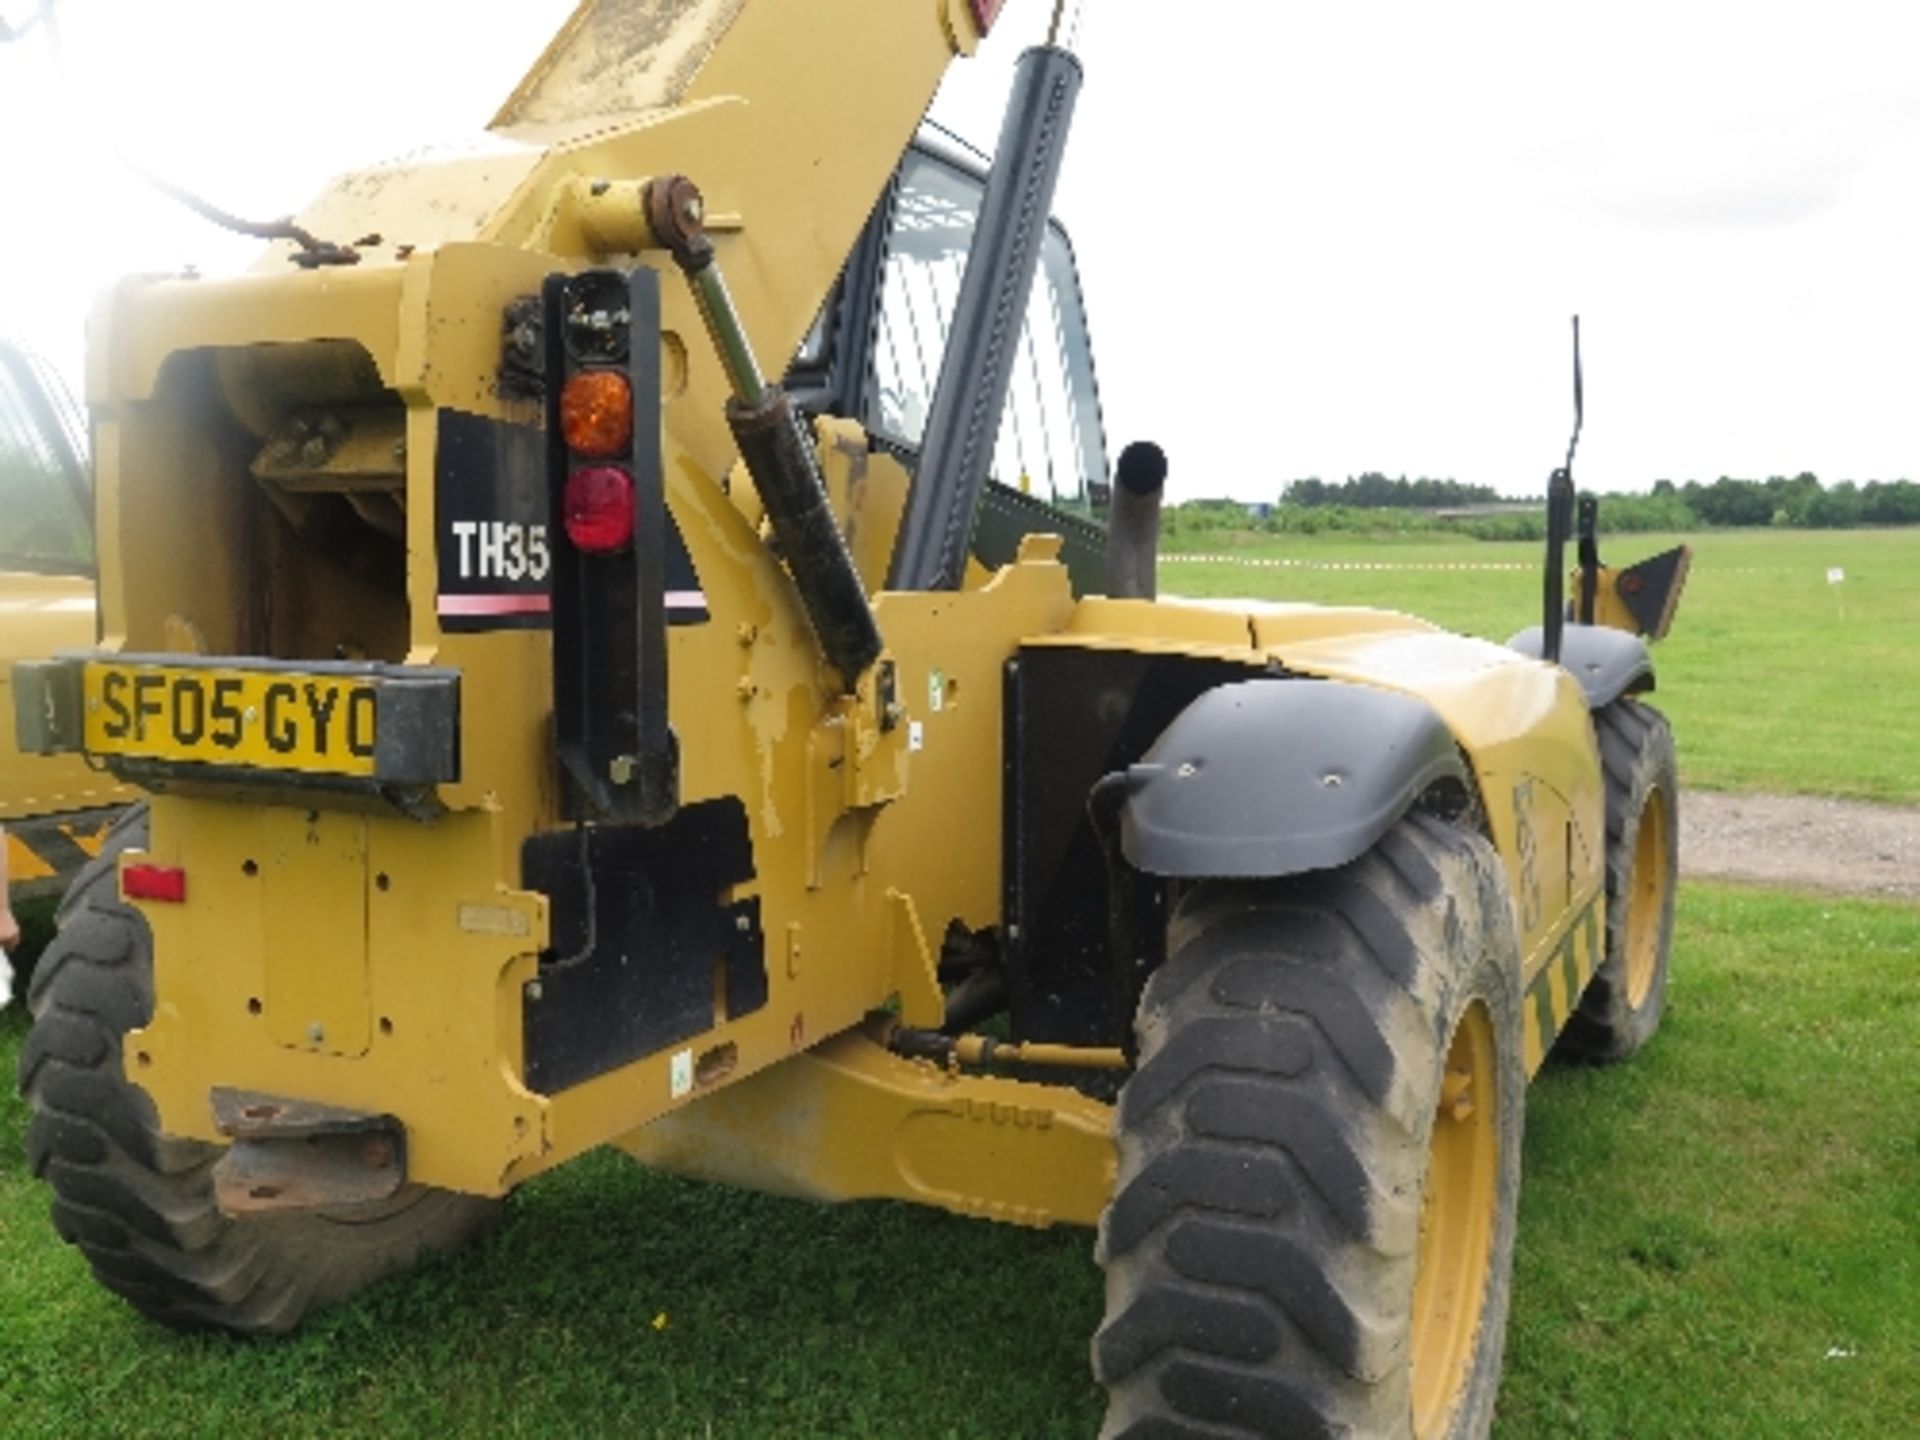 Caterpillar TH355B telehandler 2642 hrs 2005 136674
FORKS MISSING
ALL LOTS are SOLD AS SEEN - Image 5 of 9